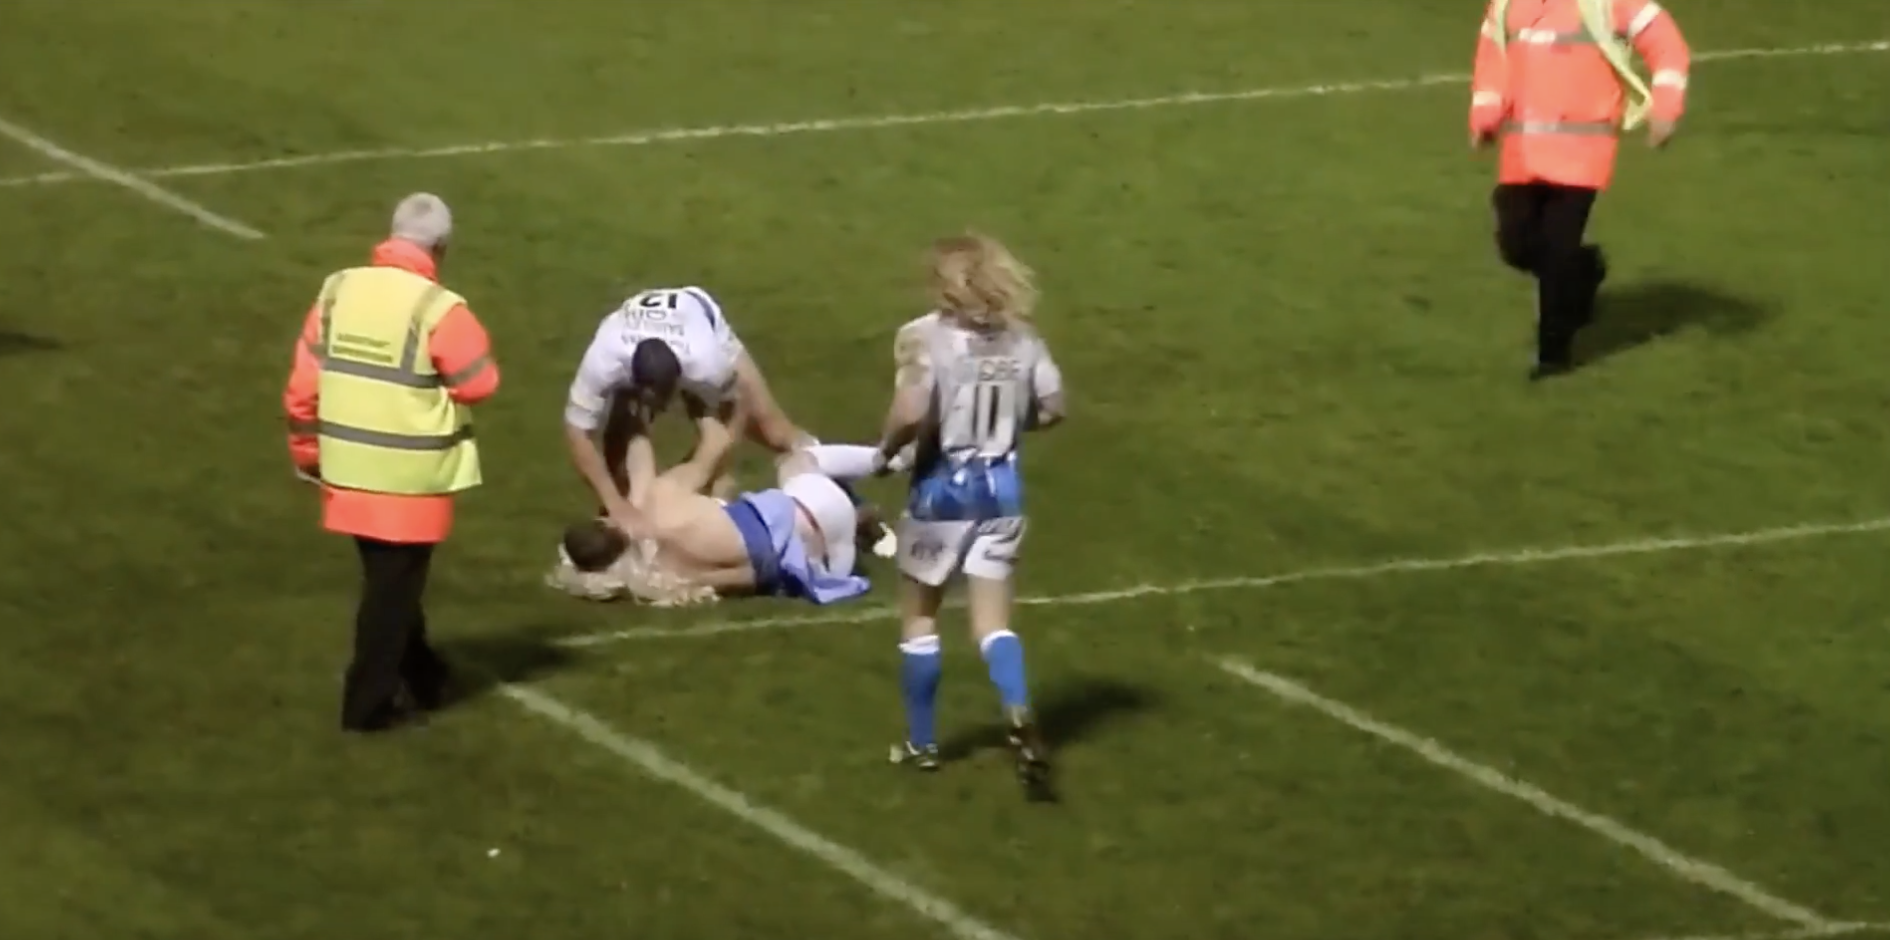 VIDEO: A fresh fails compilation highlights some of the more unsavoury moments in rugby